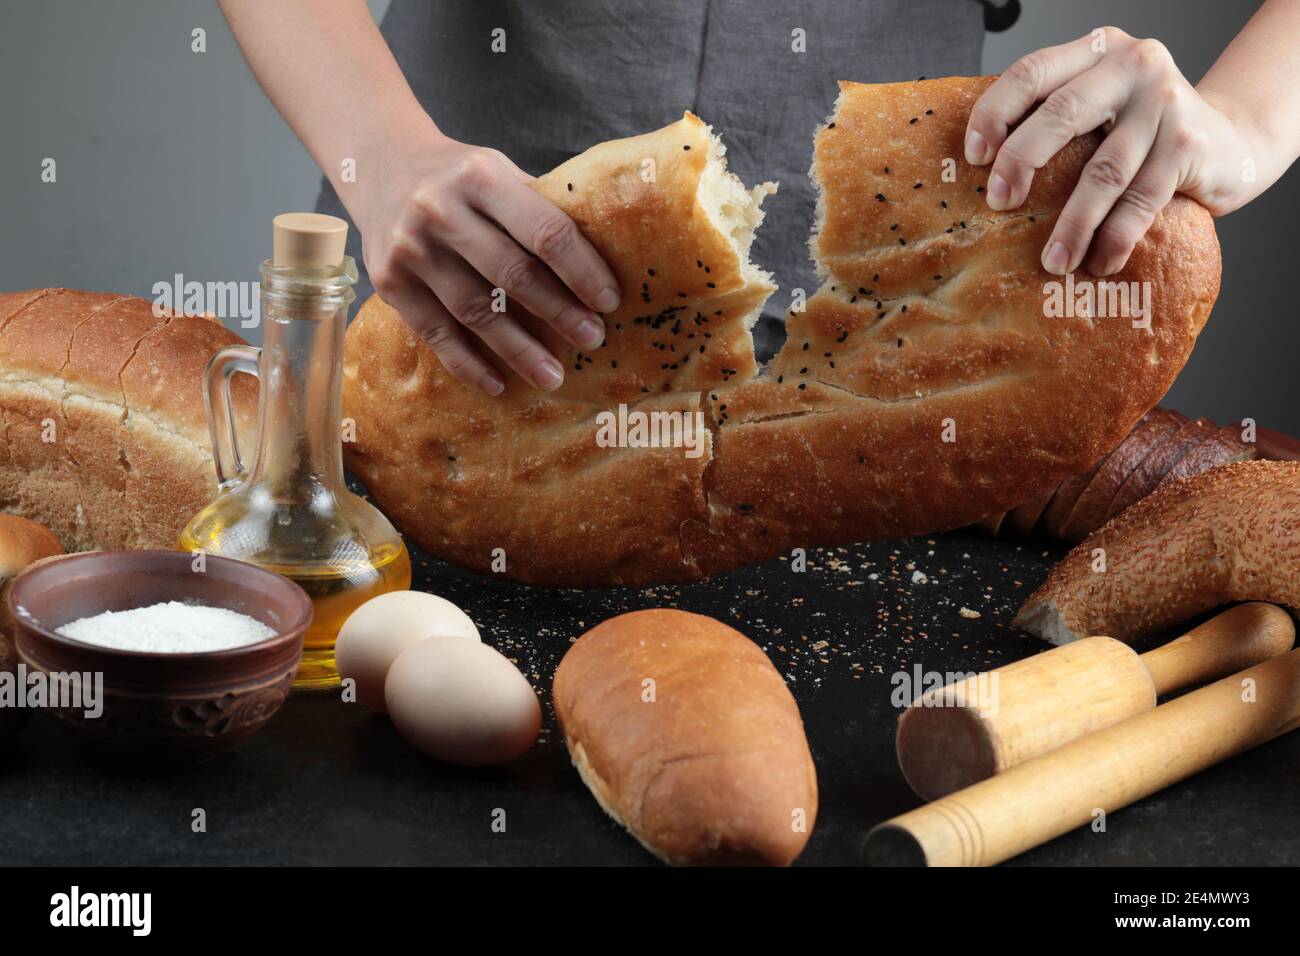 Woman cut bread into half on dark table with eggs, flour bowl and glass of oil Stock Photo